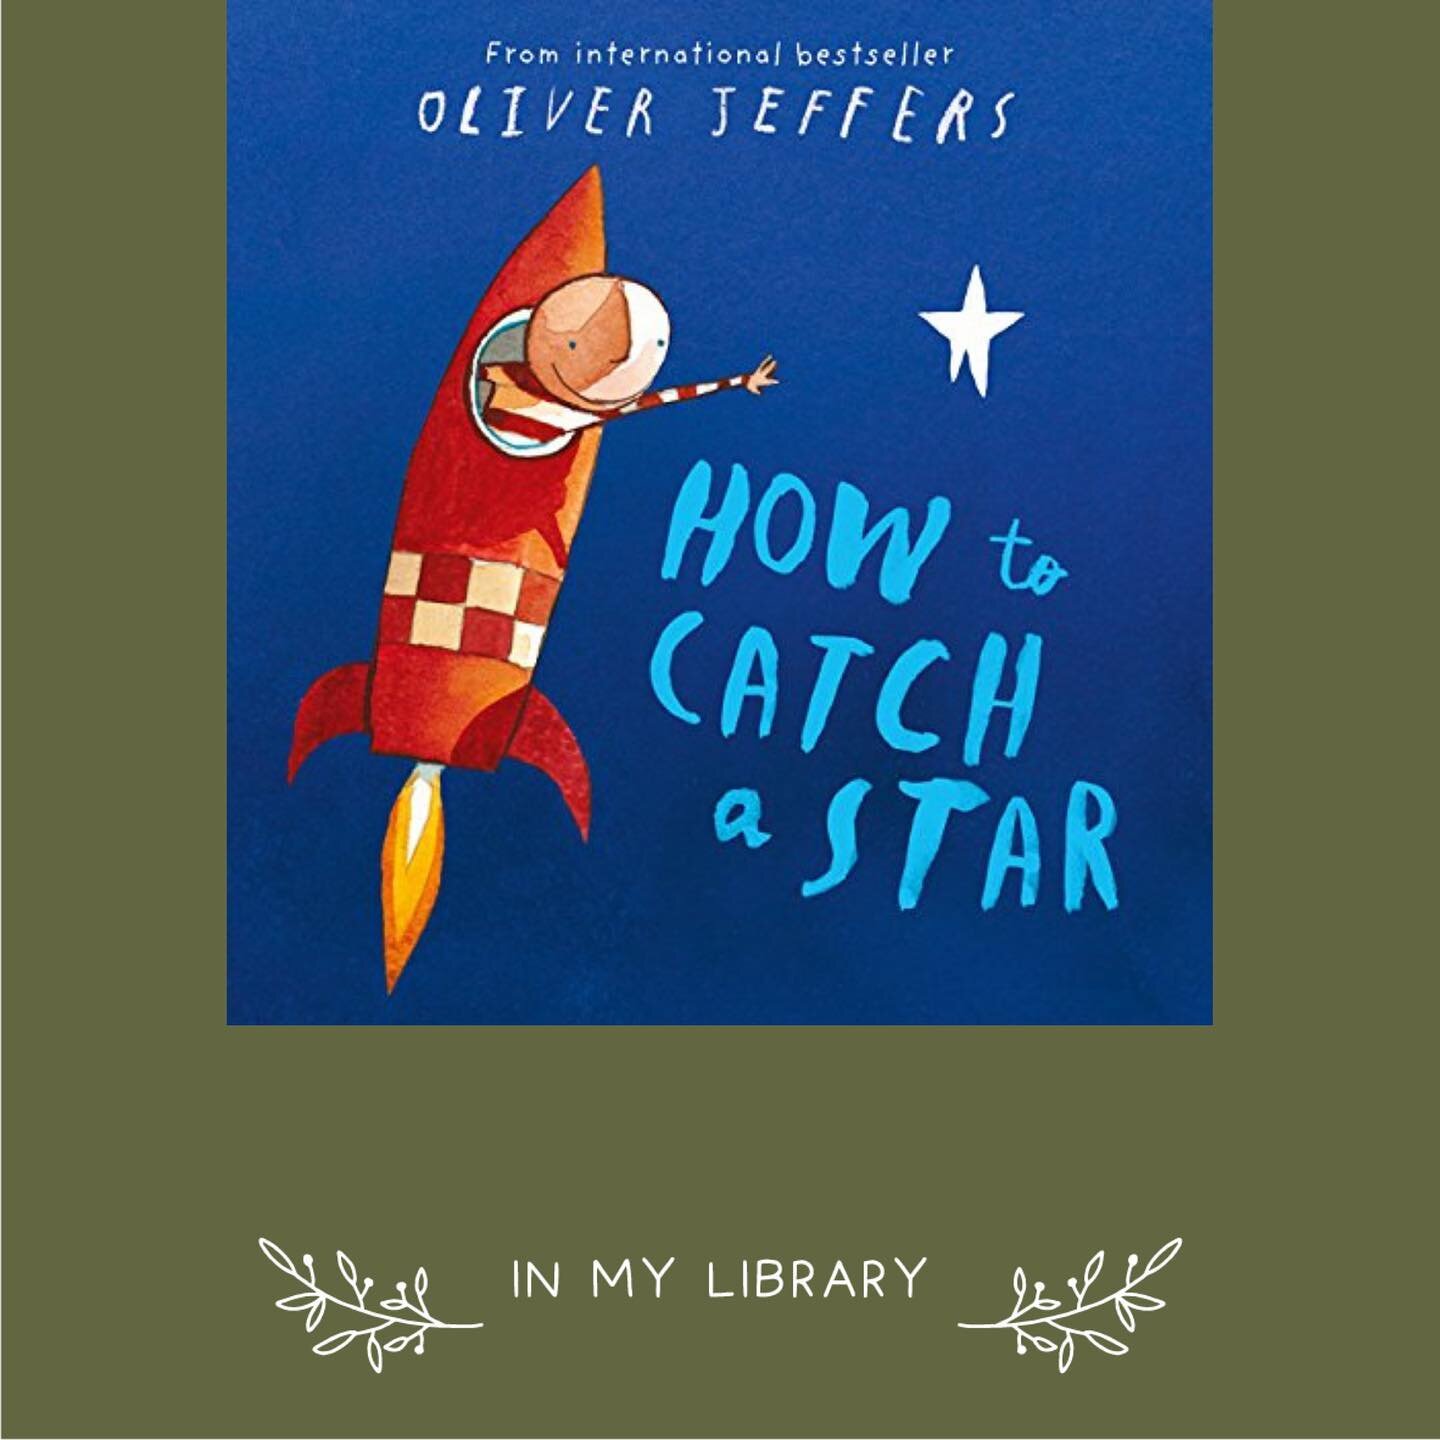 STORYTIME 📚 &laquo;&nbsp;How to catch a star&nbsp;&raquo; written by Oliver Jeffers